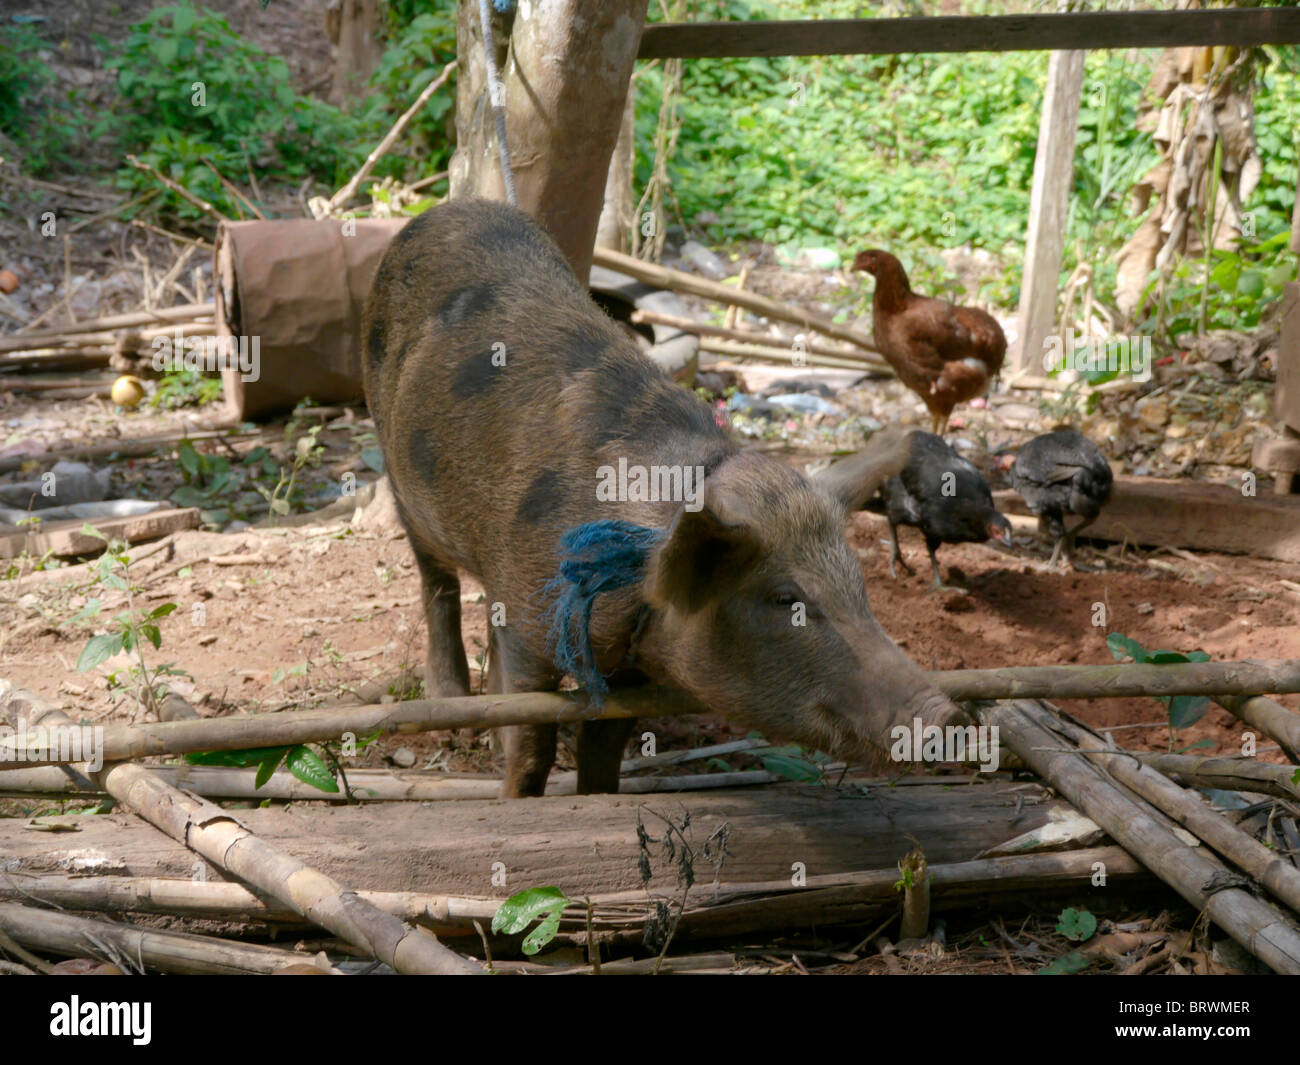 BOLIVIA ECOTOPS projects in Alto Beni. Pigs of Remolinos. photograph by Sean Sprague Stock Photo